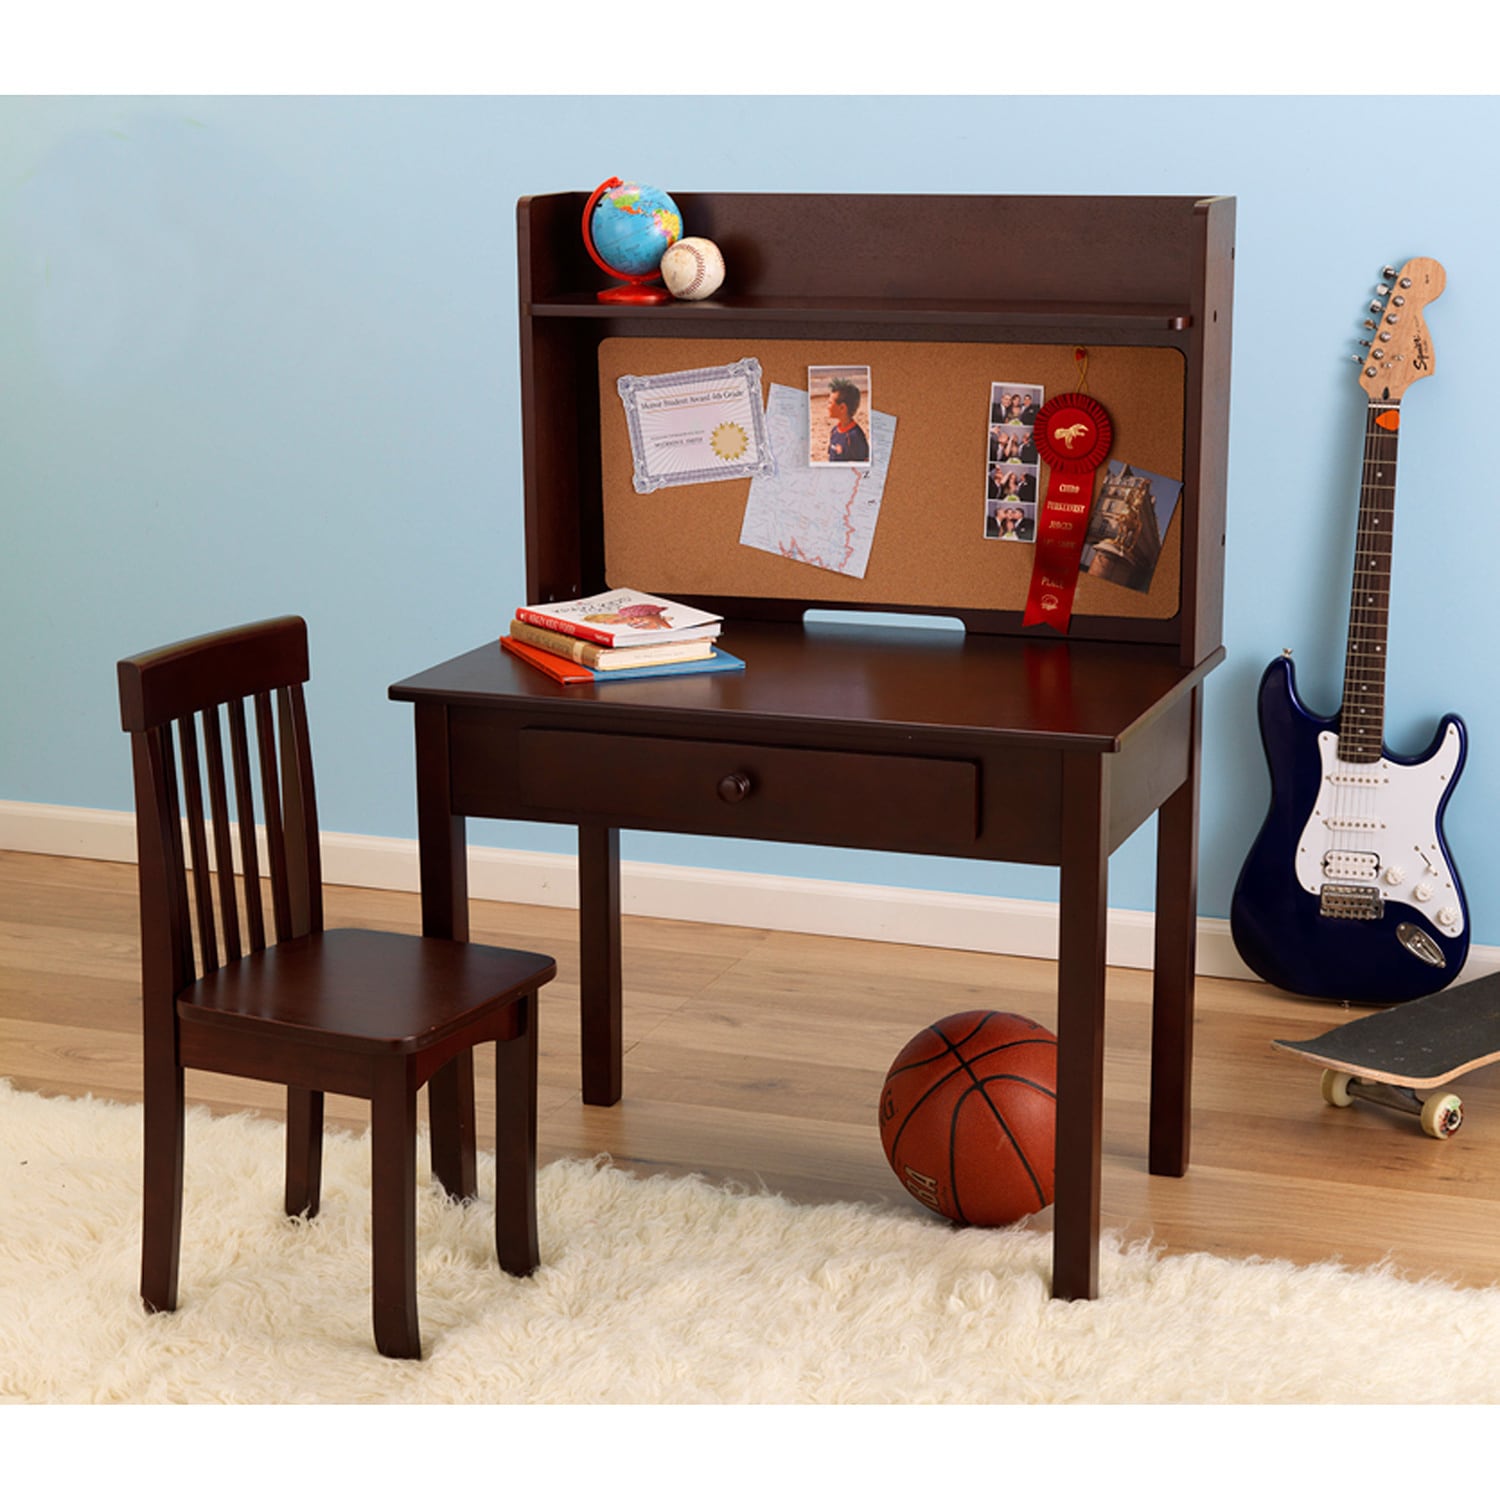 Shop Kidkraft Pinboard Desk With Hutch And Chair Overstock 7999164